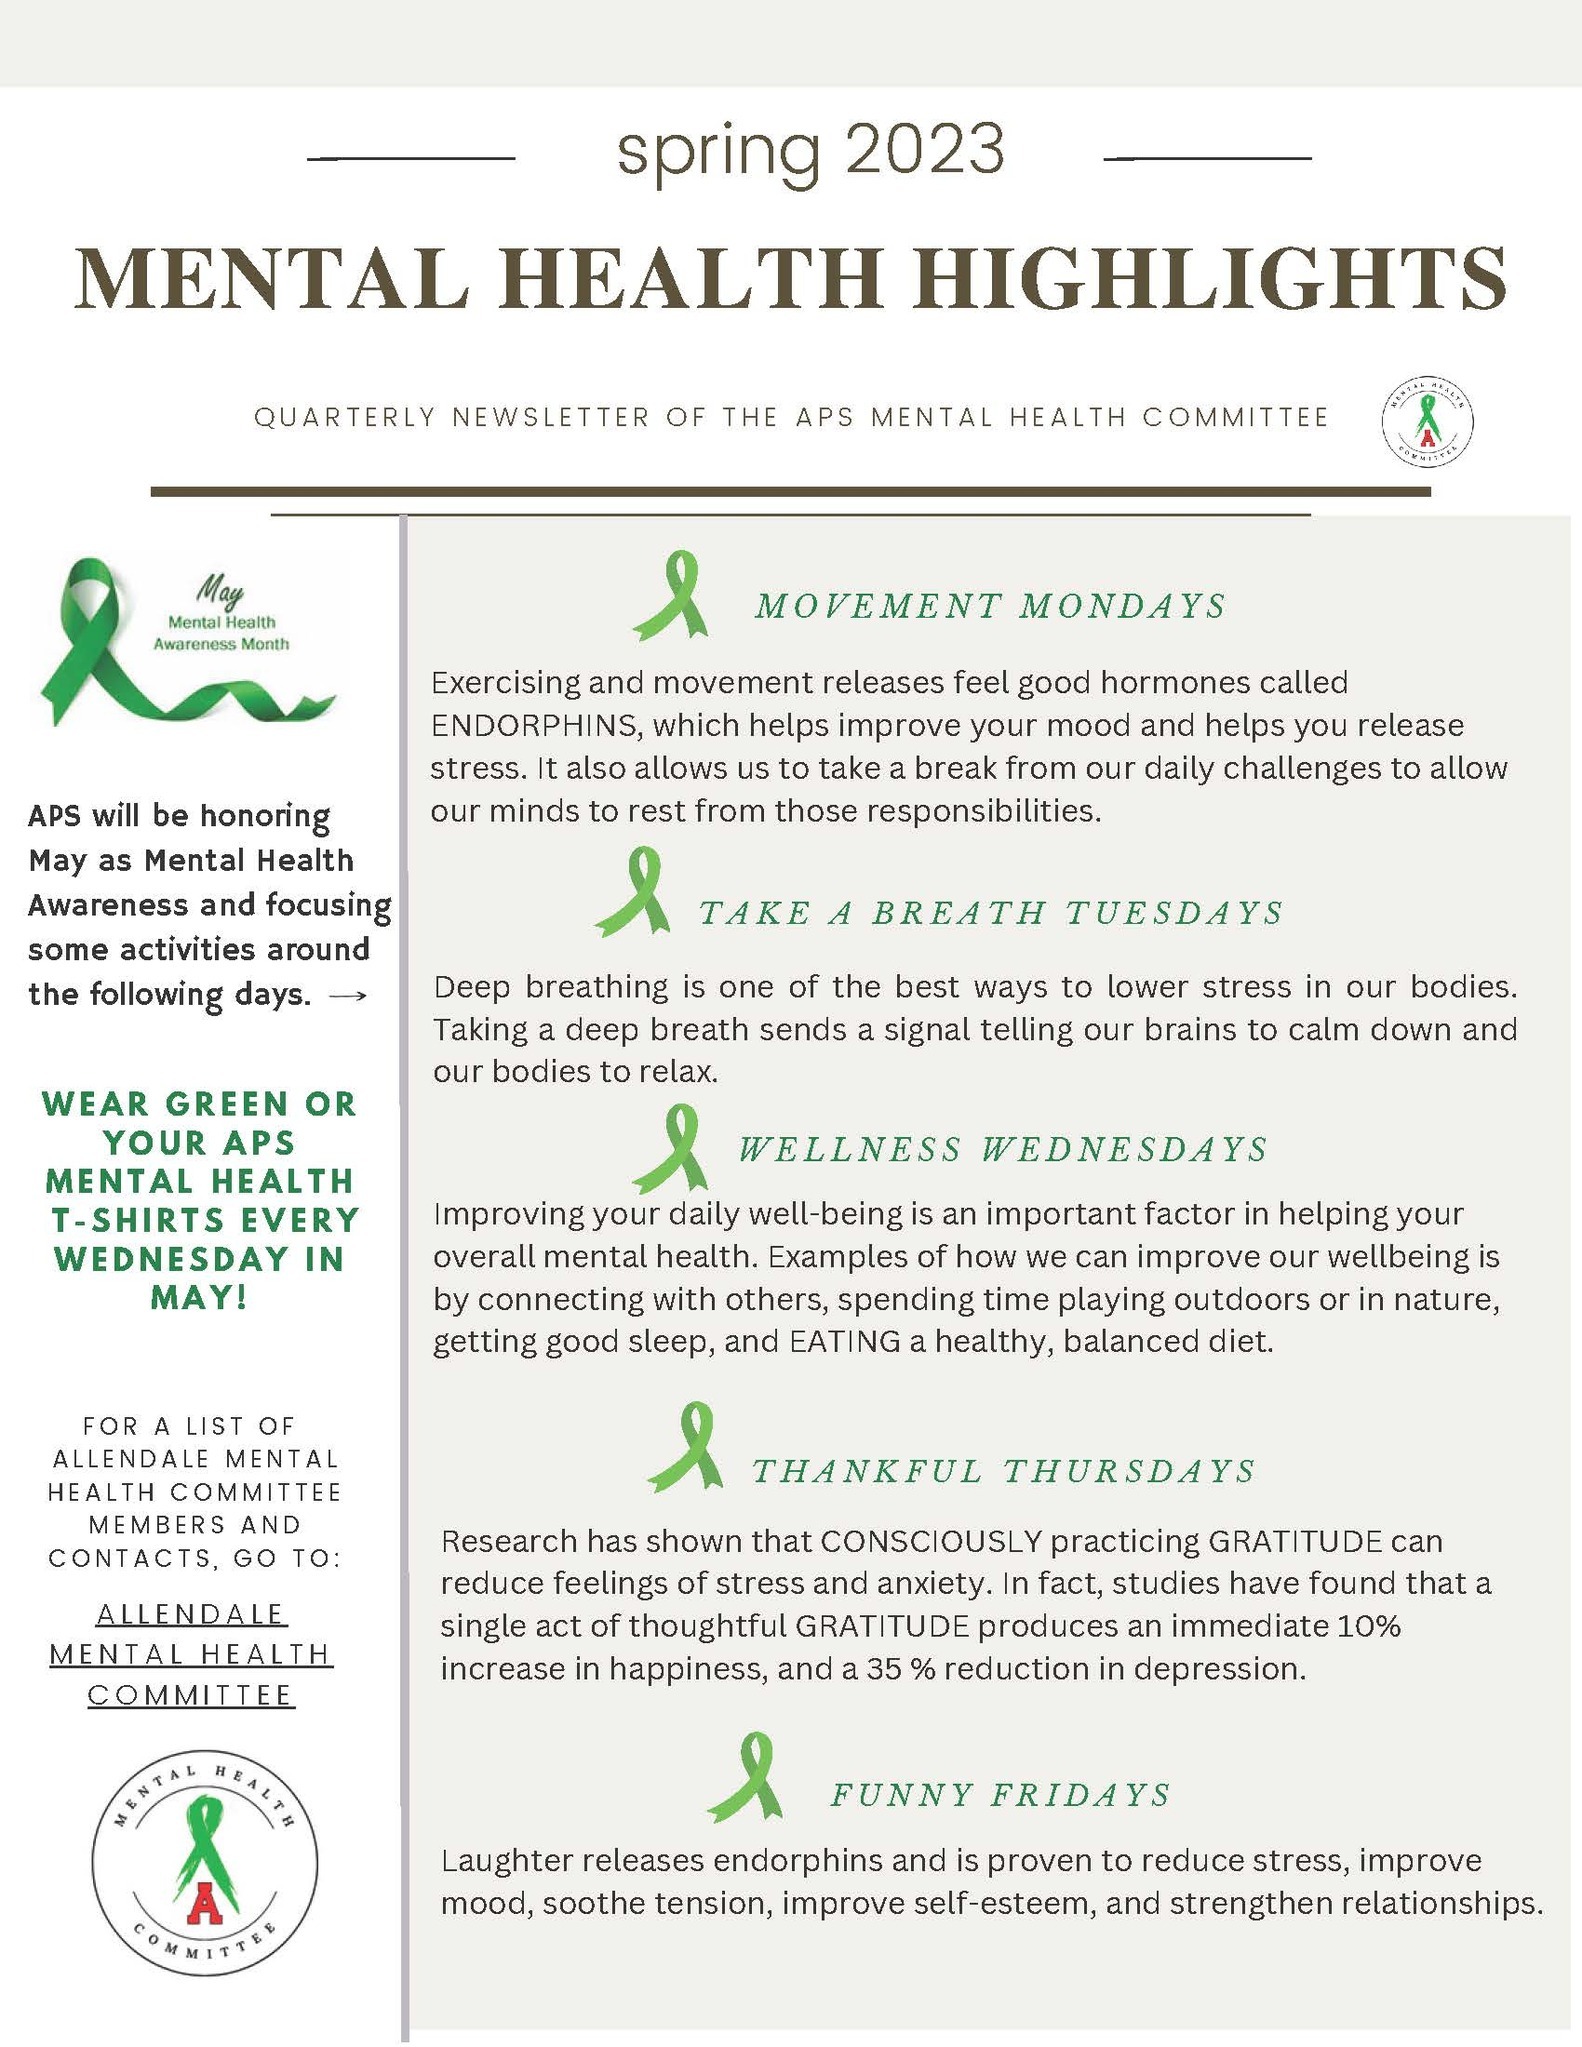 Mental Health Newsletter page 1